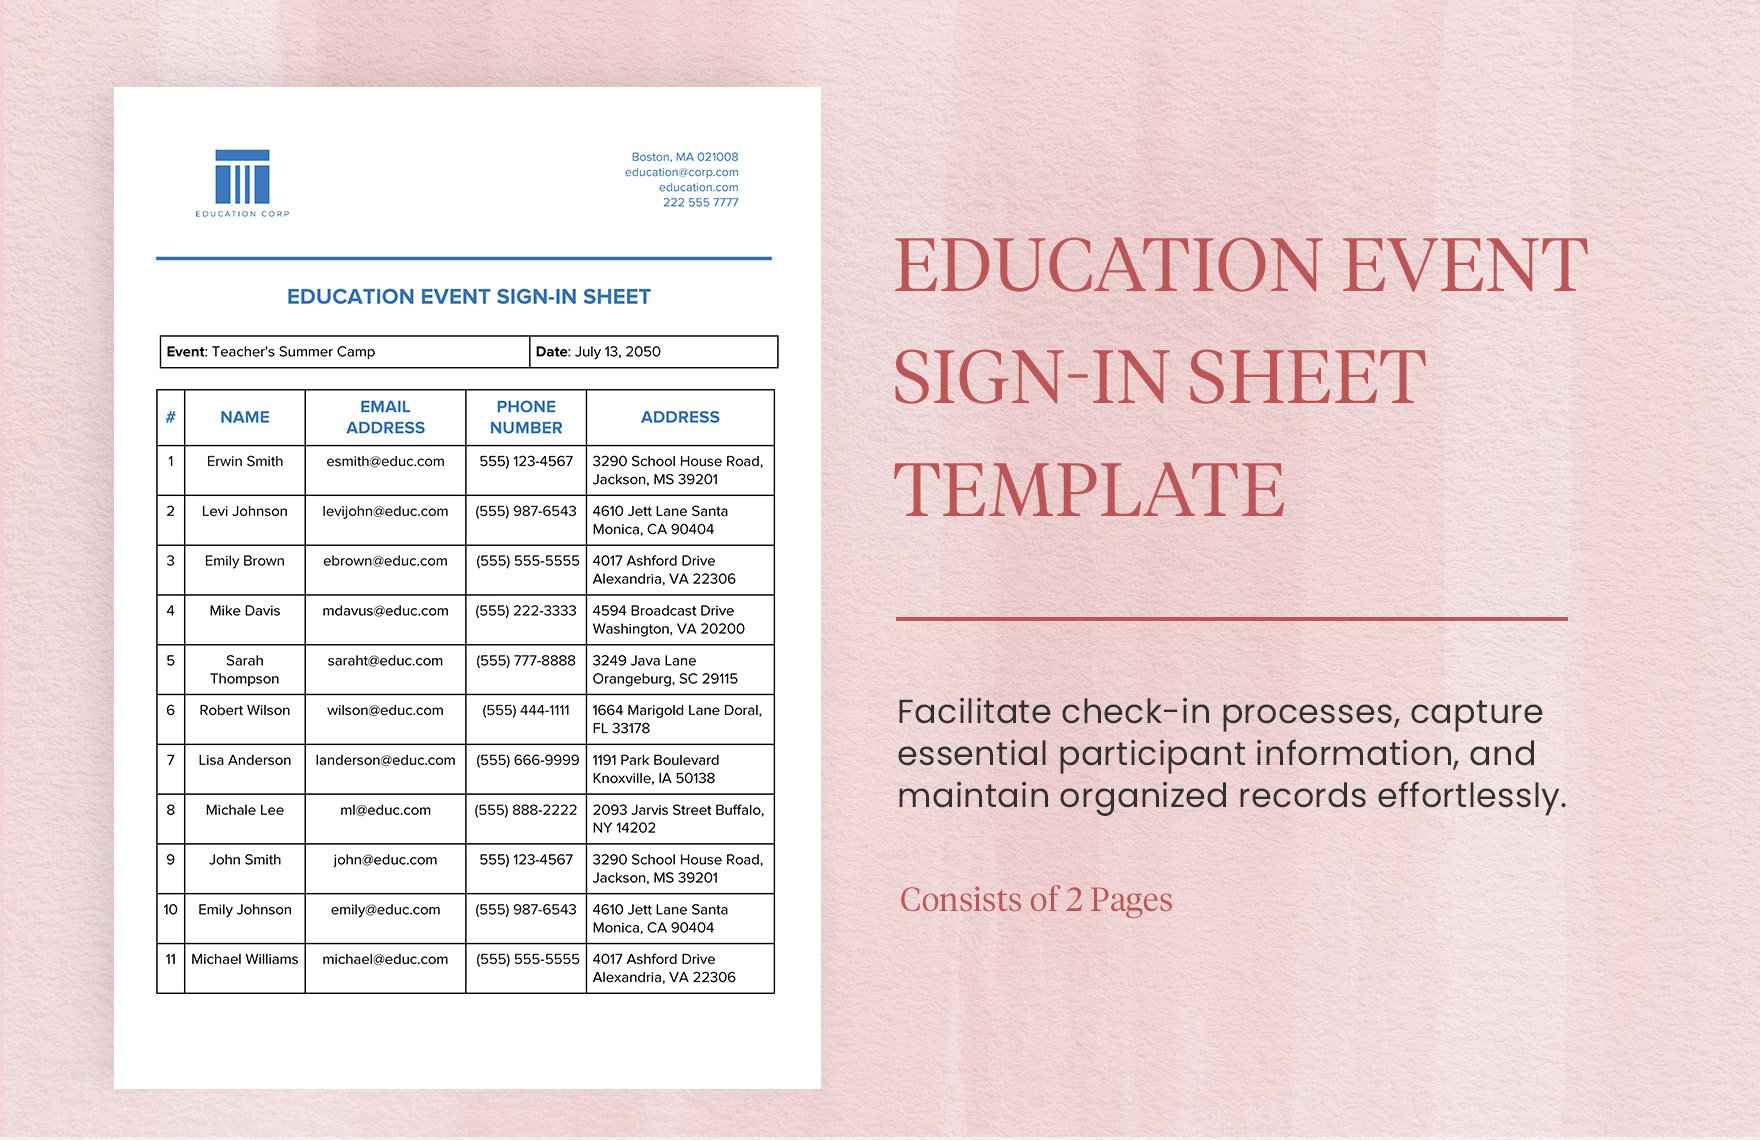 Education Event Sign-In Sheet Template